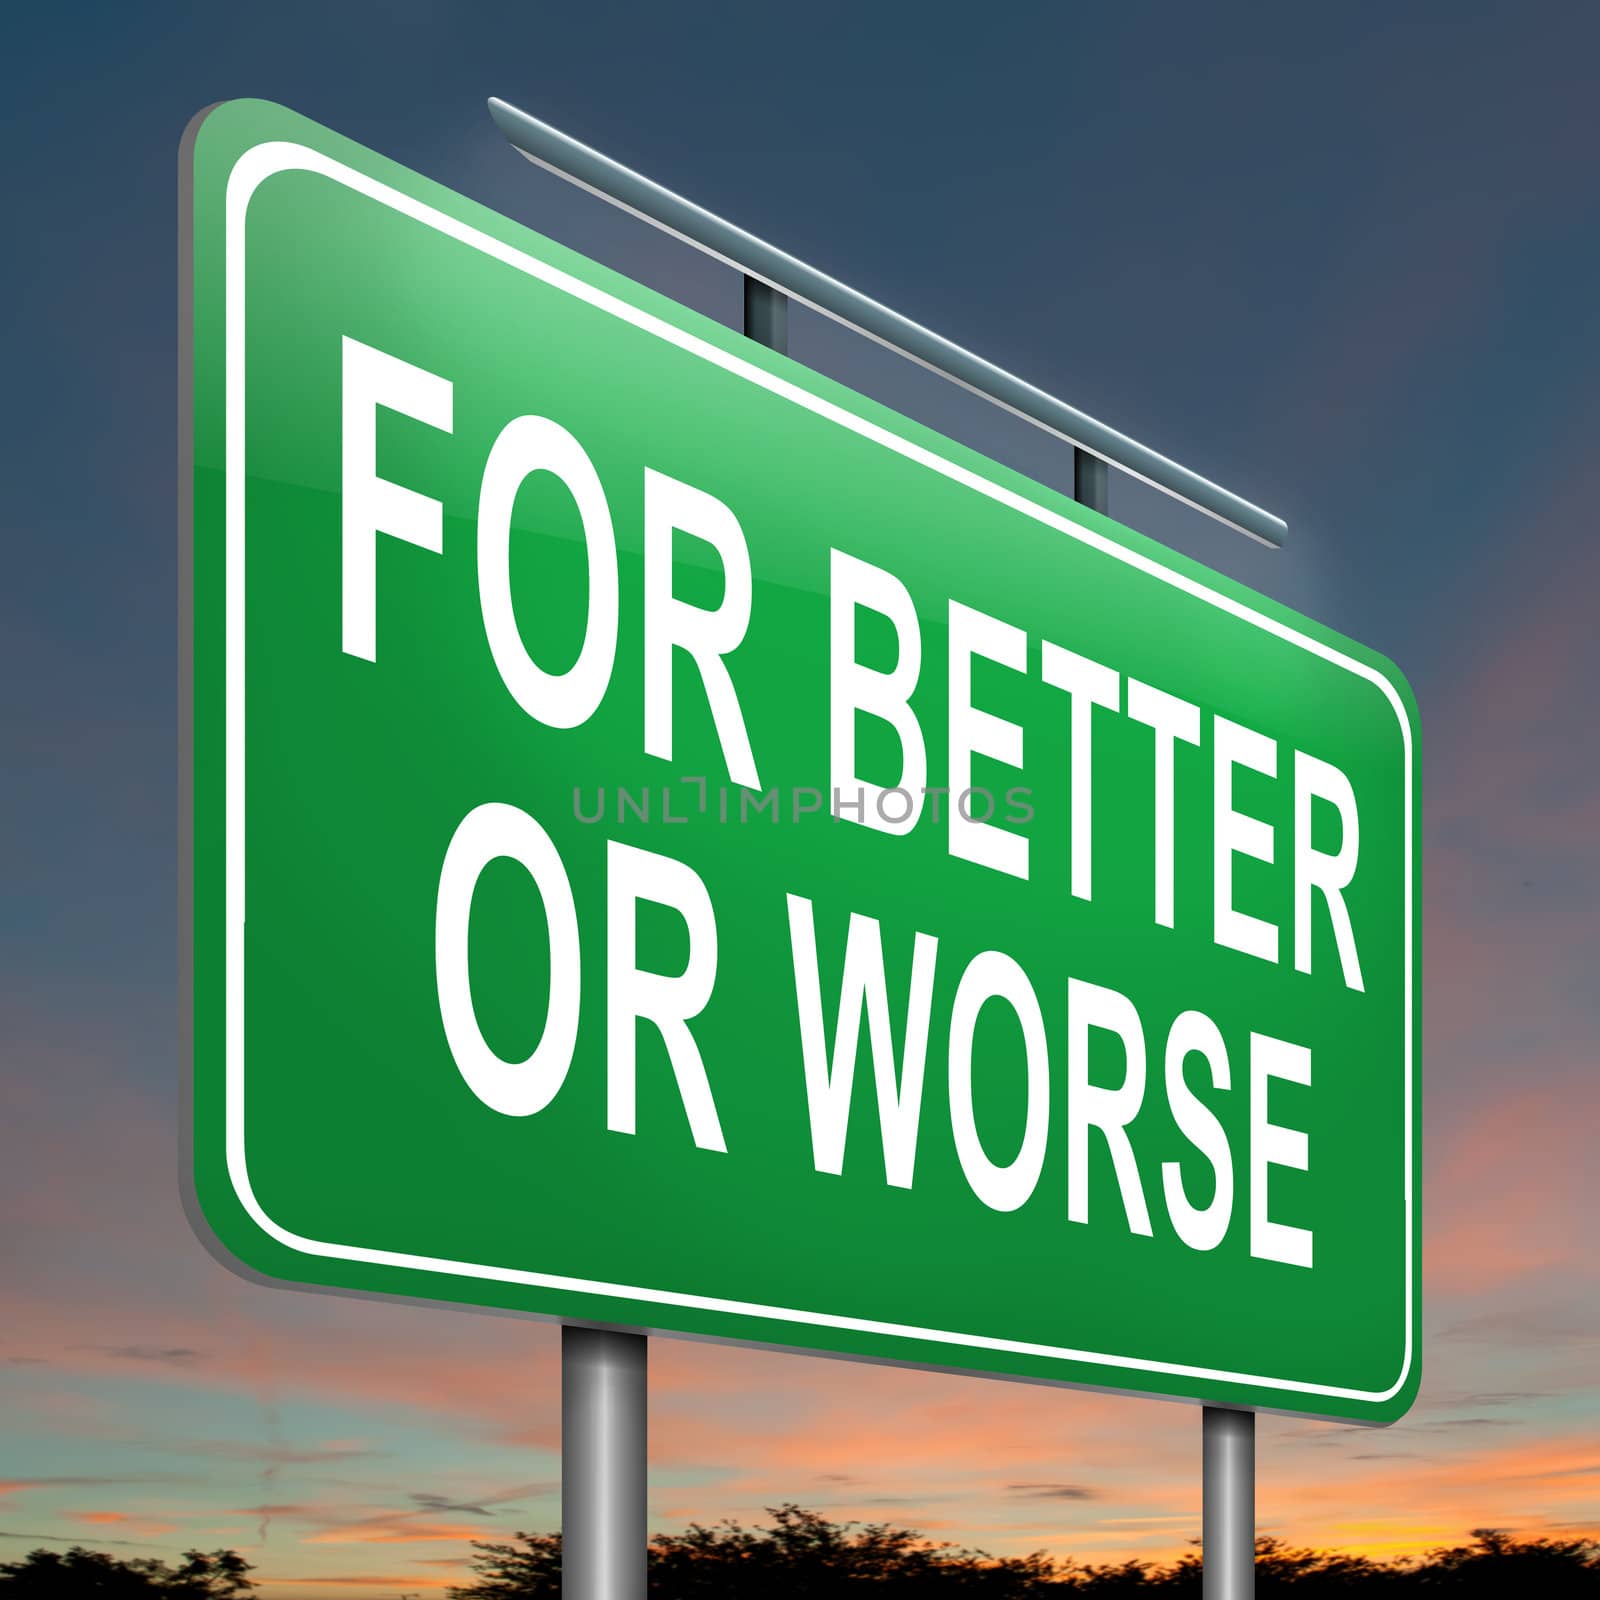 Illustration depicting a roadsign with a for better or worse concept. Dusk sky background.